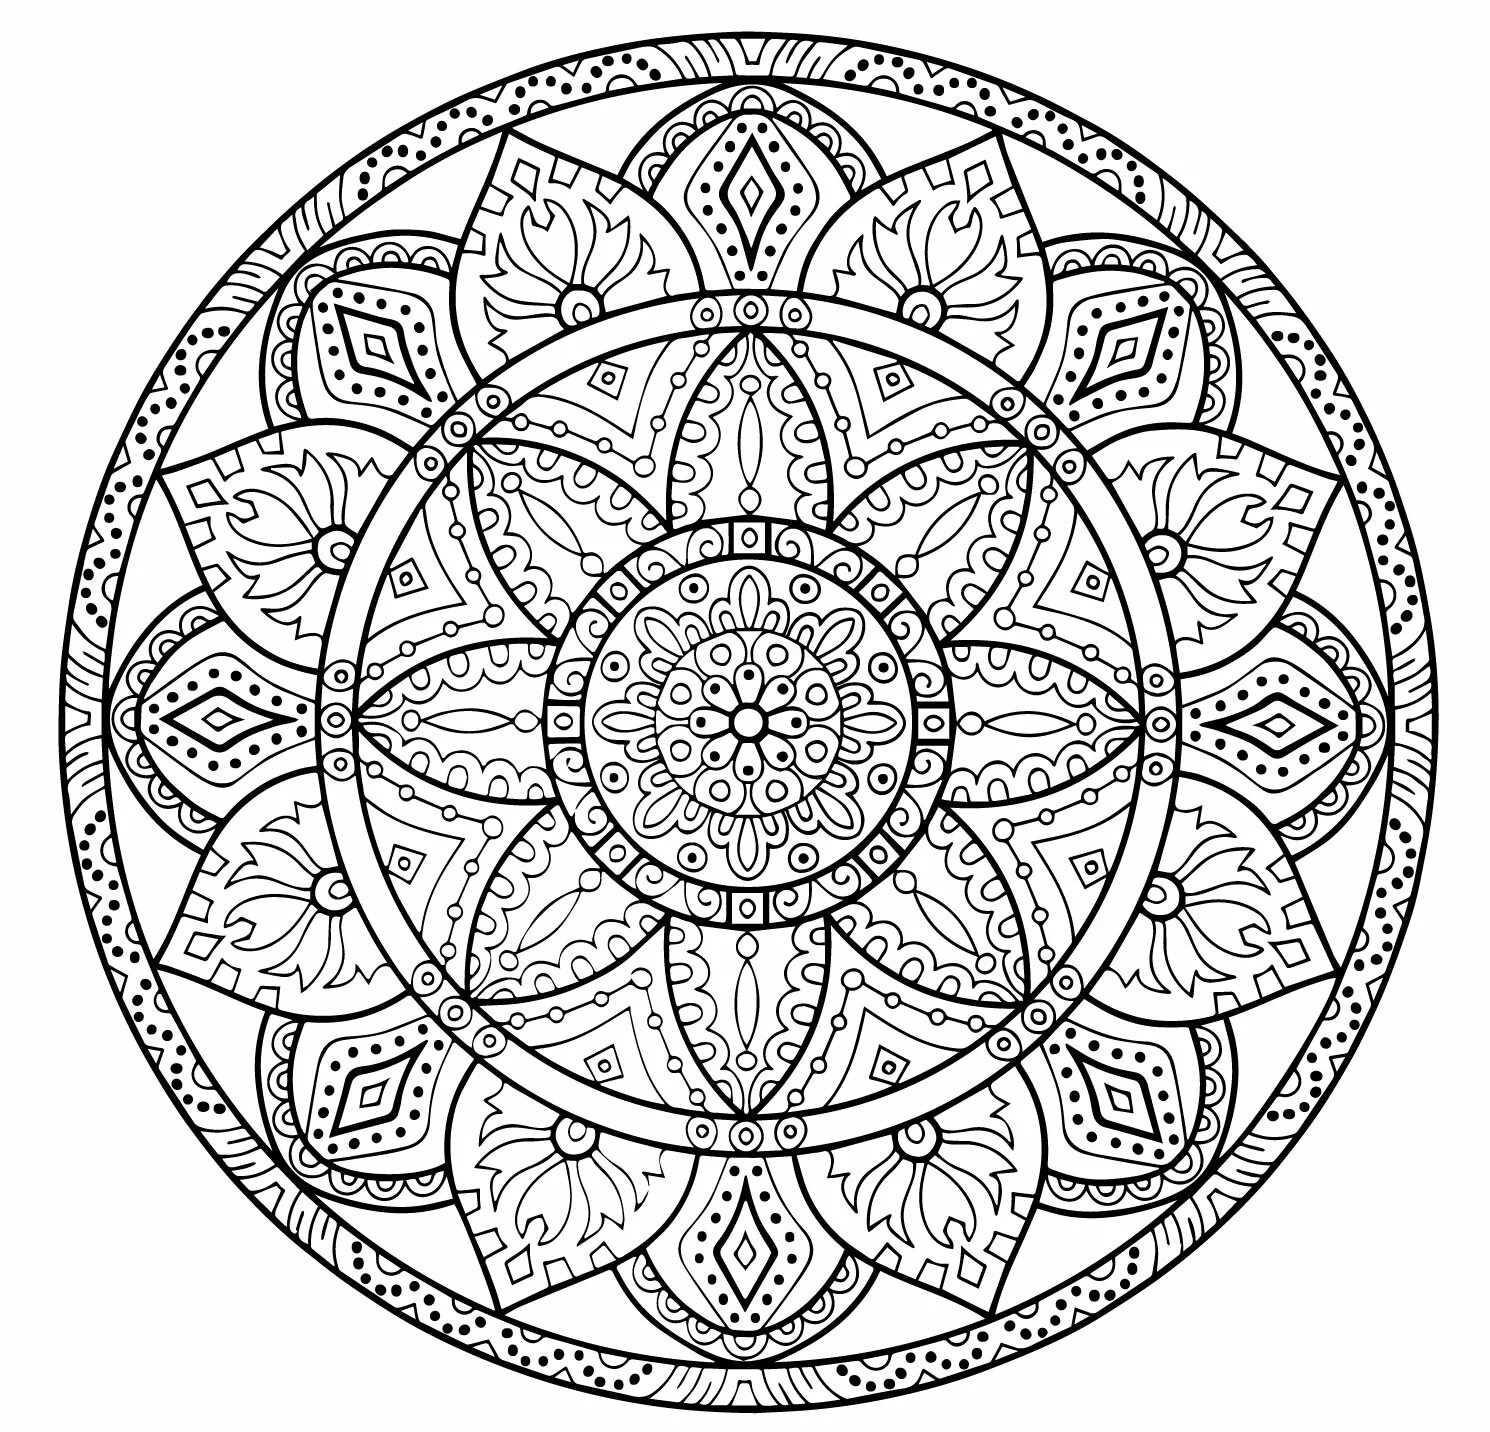 Amazing coloring mandala for victory and prosperity